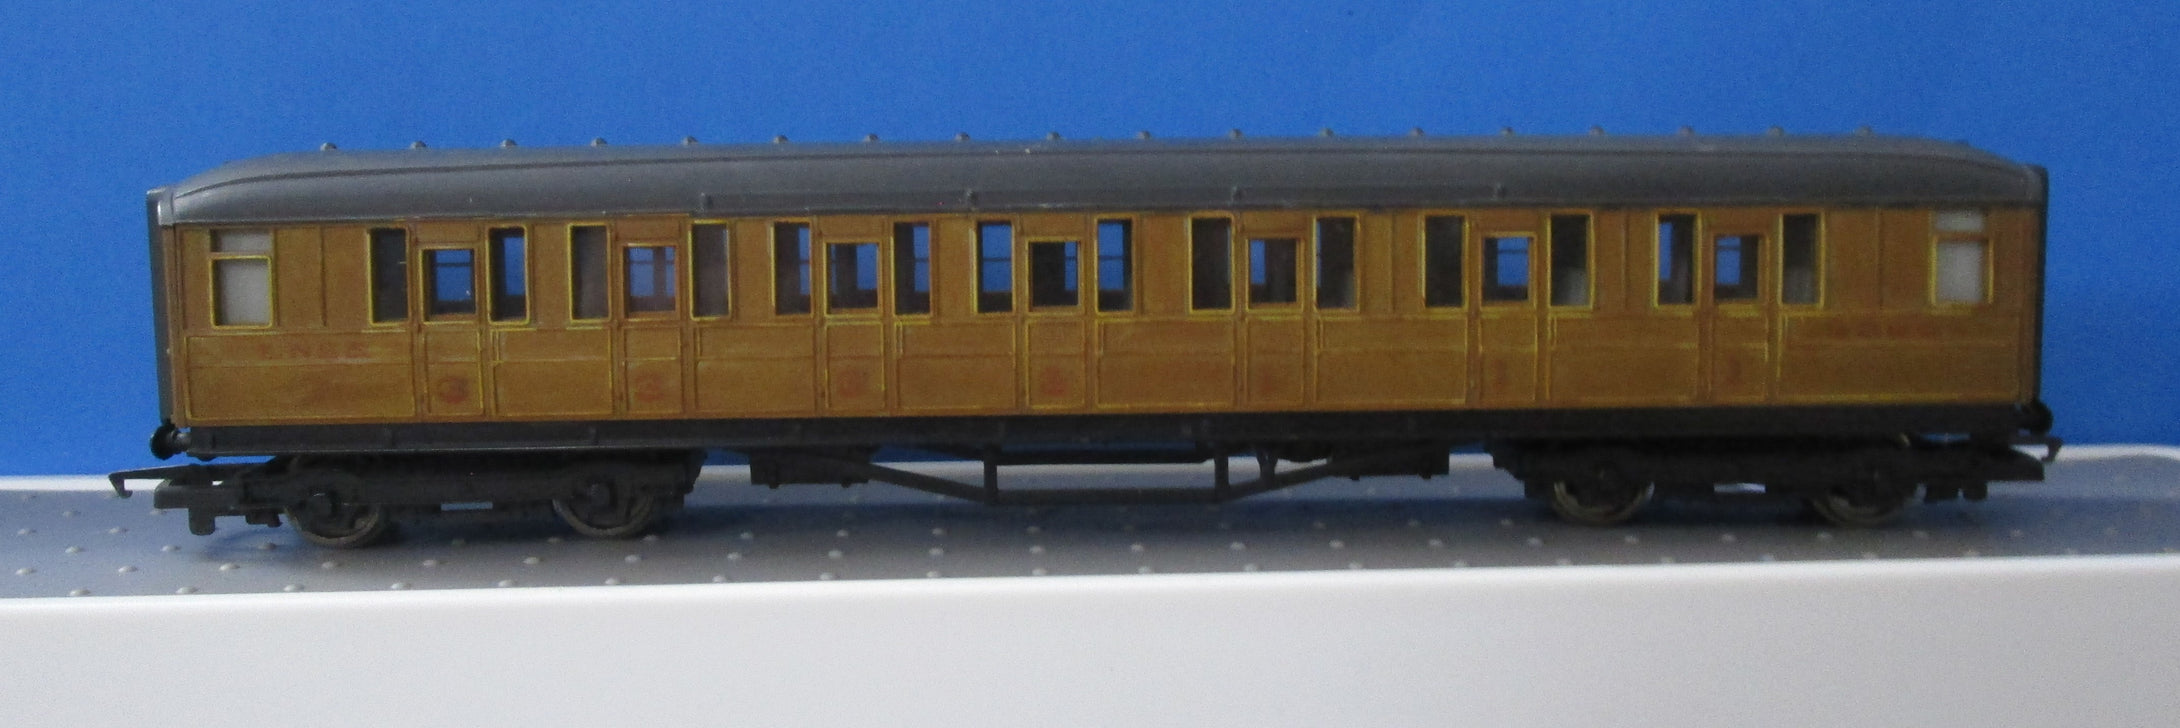 R1039-P03 HORNBY Gresley Teak first/third corridor composite - 22356 - repainted sides and roof - Railroad range - UNBOXED